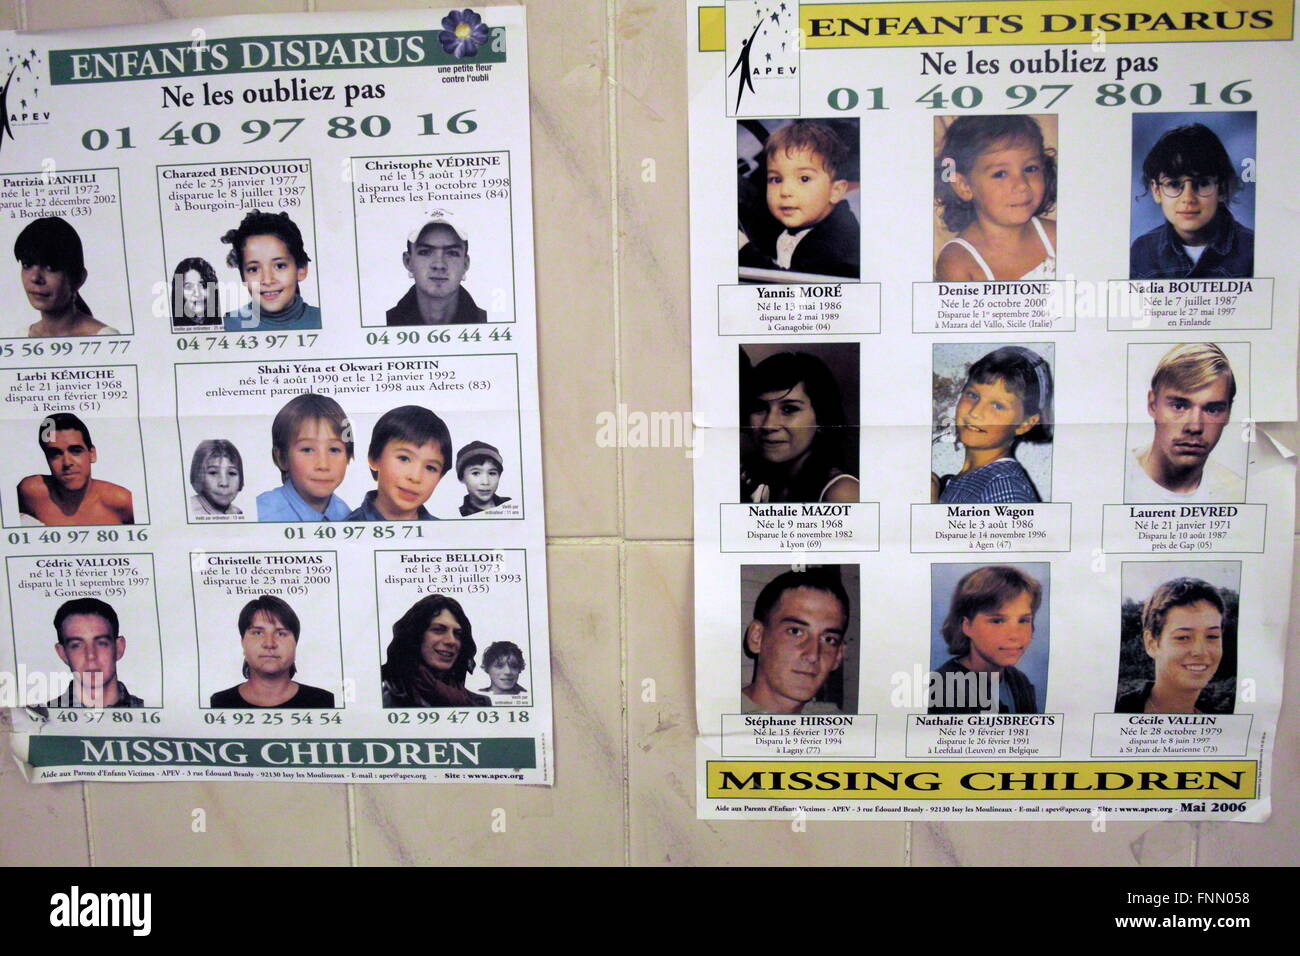 AJAXNETPHOTO. 2008. LOUVECIENNES, FRANCE. - ENFANTS DISPARU - POSTERS OF MISSING CHILDREN ON A WALL OF THE PUBLIC WAITING ROOM OF LOCAL TRAIN STATION.  PHOTO:JONATHAN EASTLAND/AJAX  REF:DP81604 271 Stock Photo